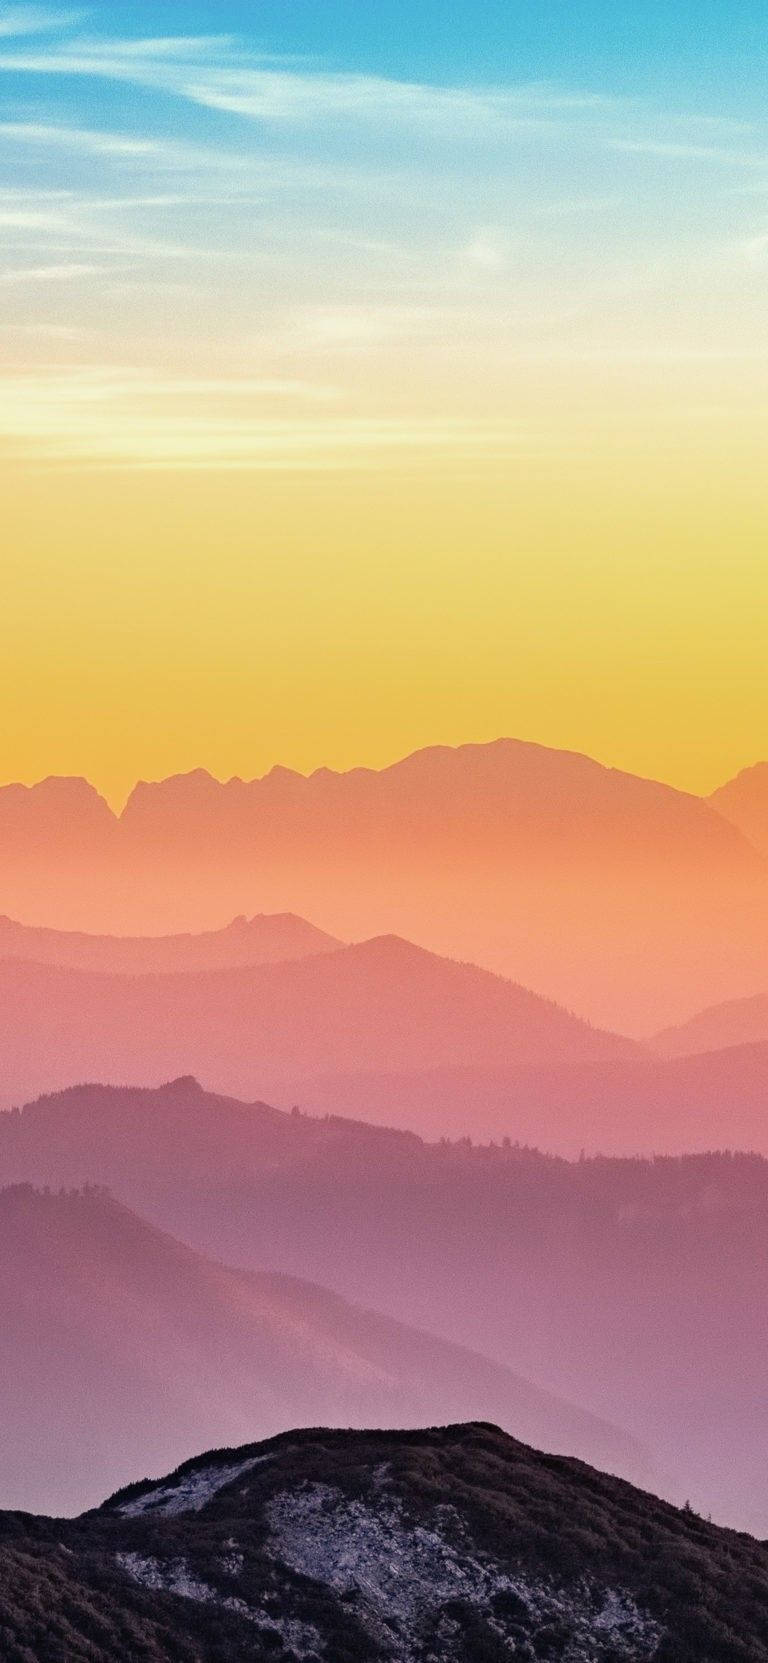 A Colorful Sunset Over The Mountains Background